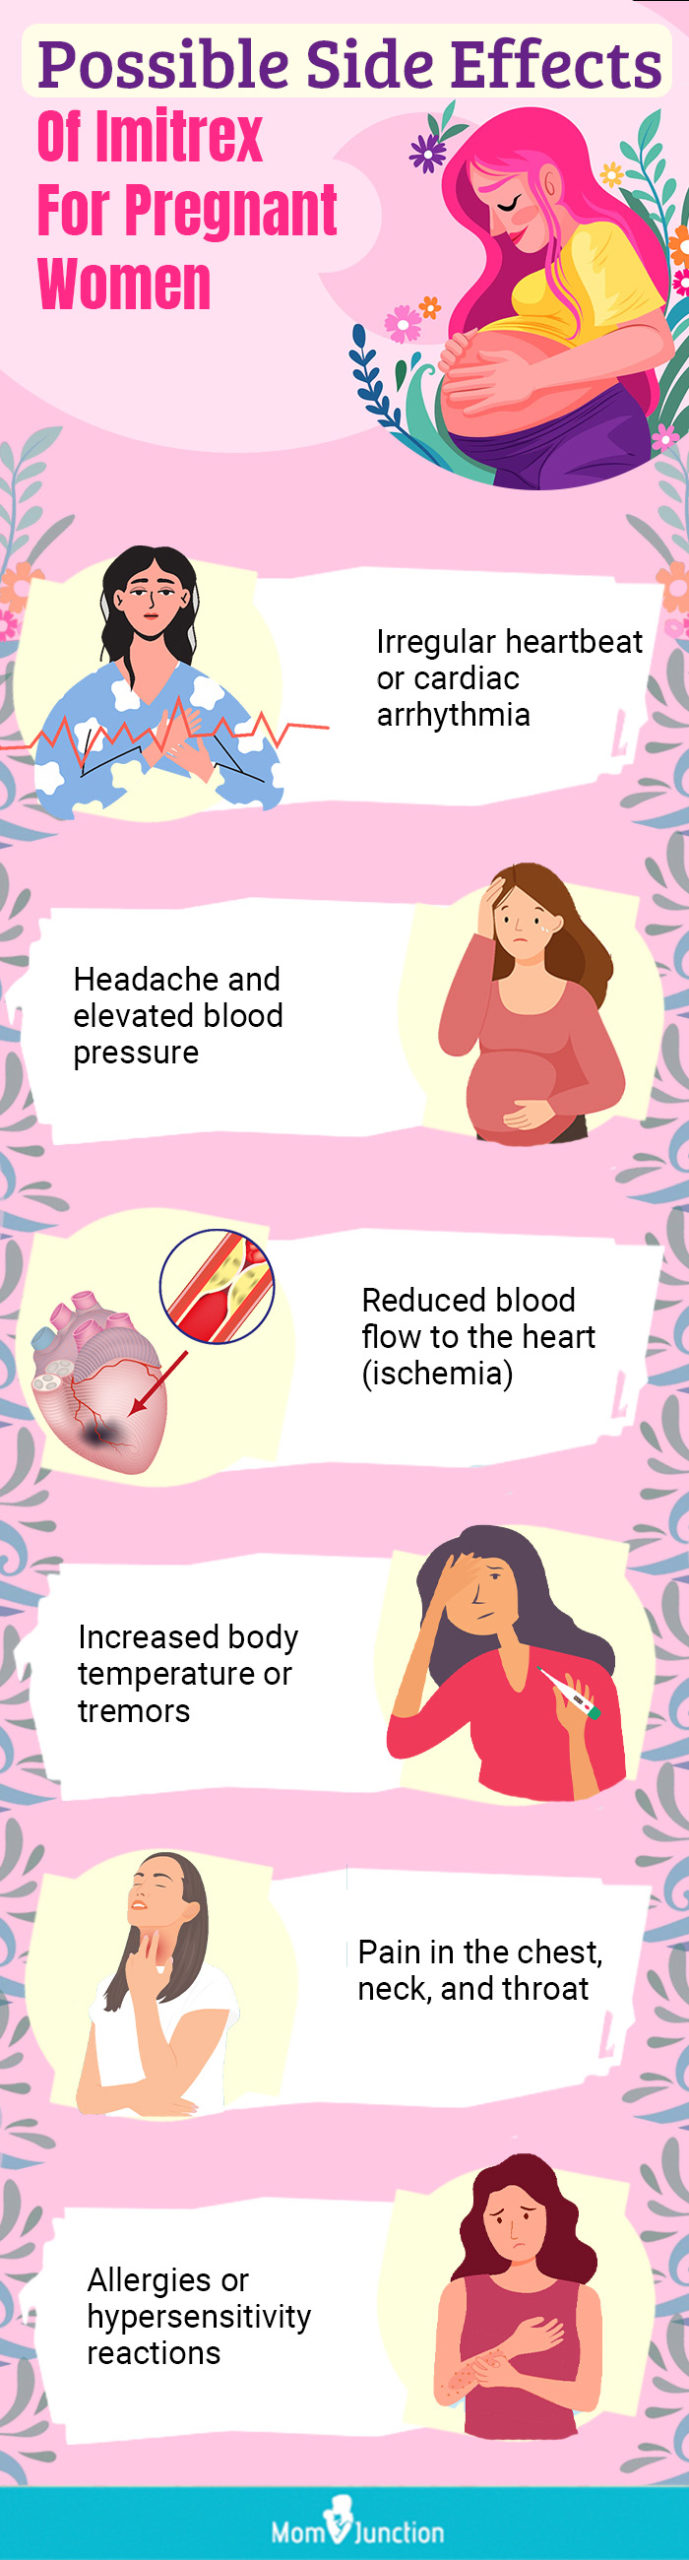 possible side effects of imitrex for pregnant women recovered [infographic]